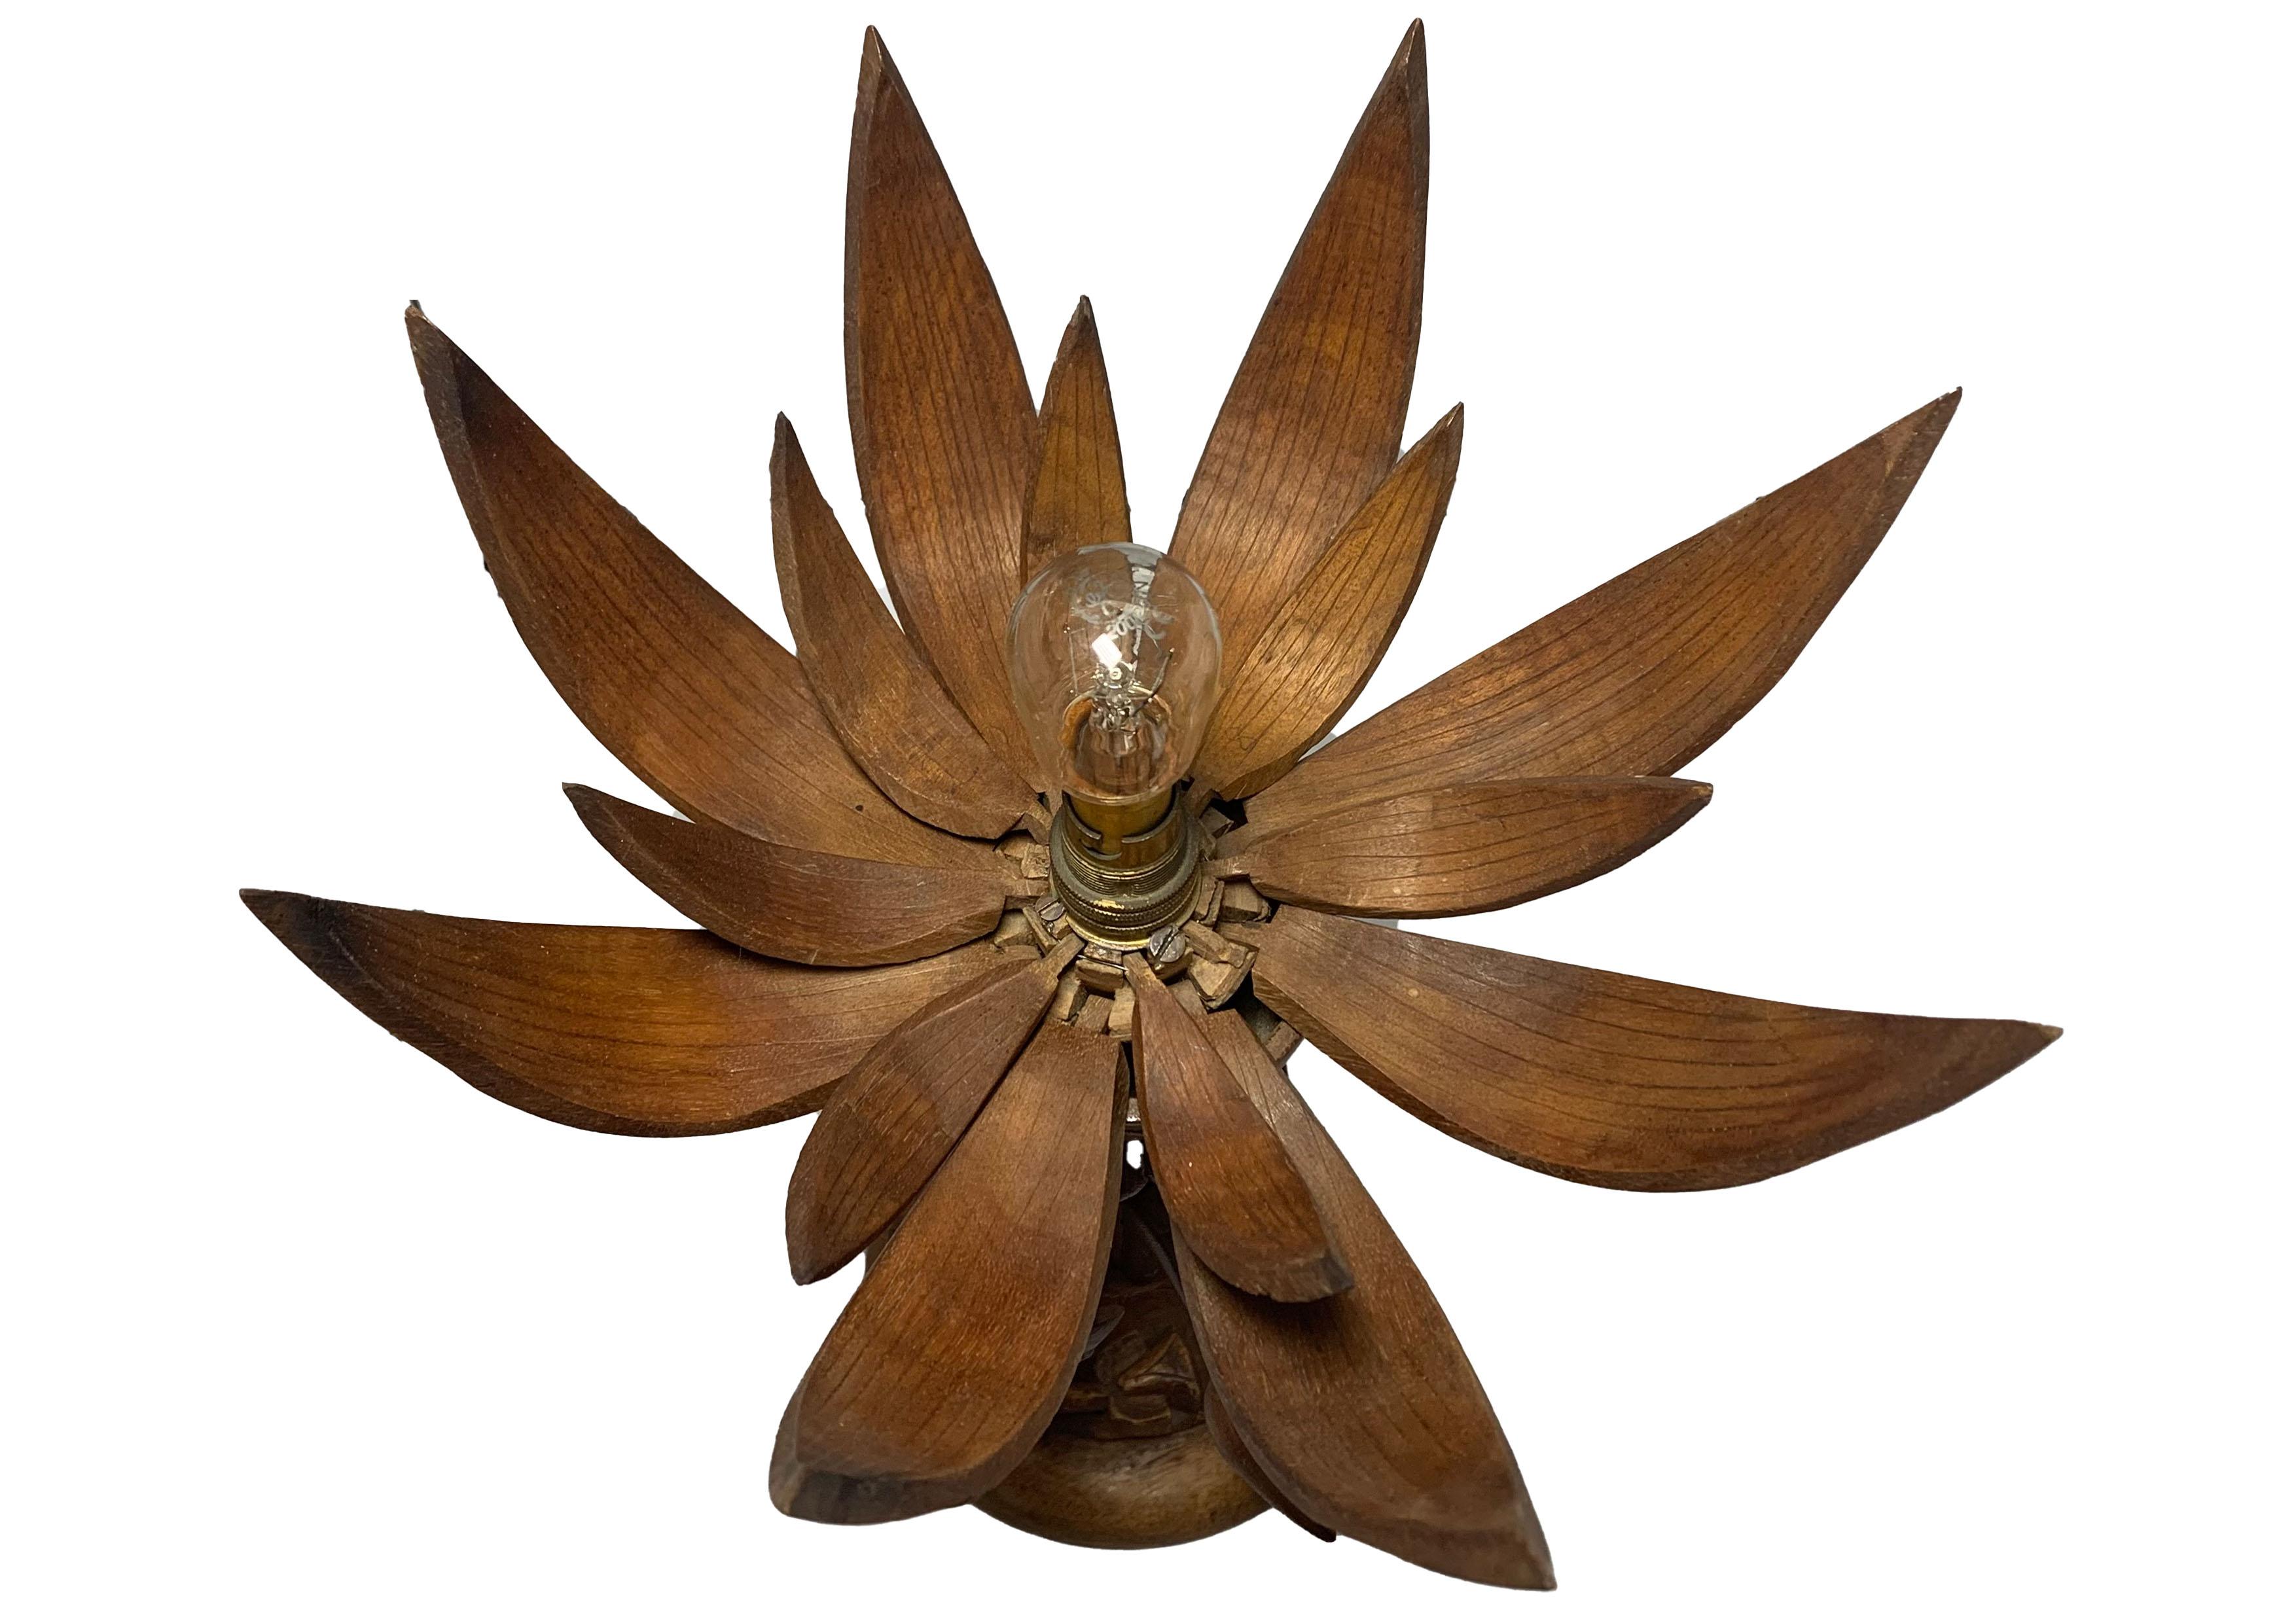 British Unusual Hand Carved Organic Wooden Lotus Flower Table Lamp, Petals Open & Close For Sale